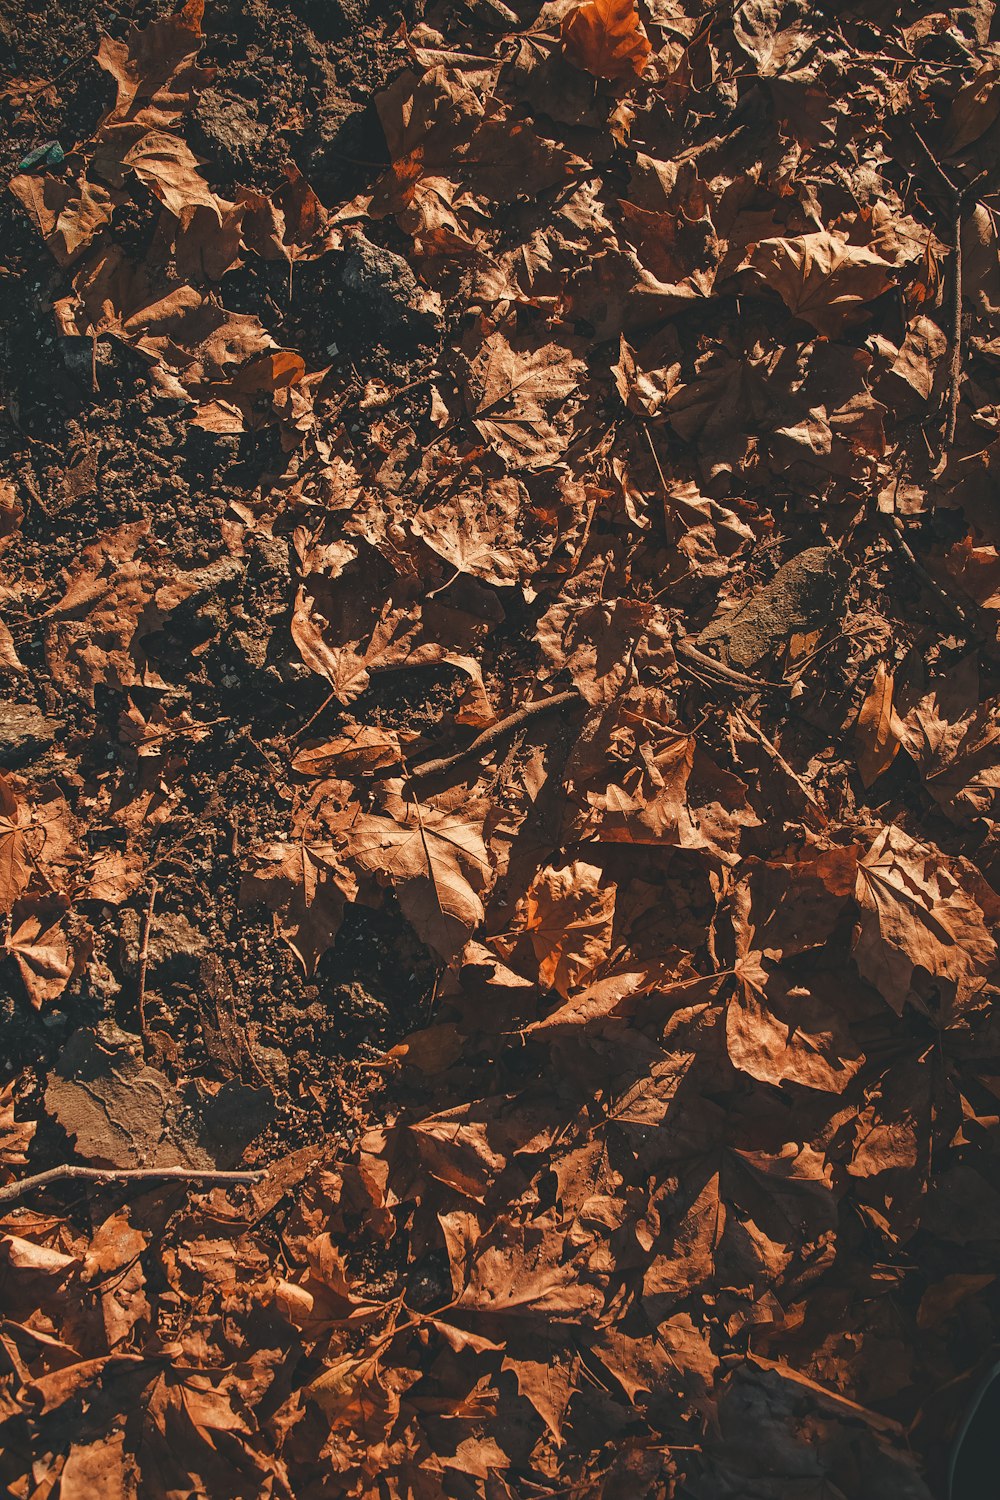 macro photography of brown leaves on ground